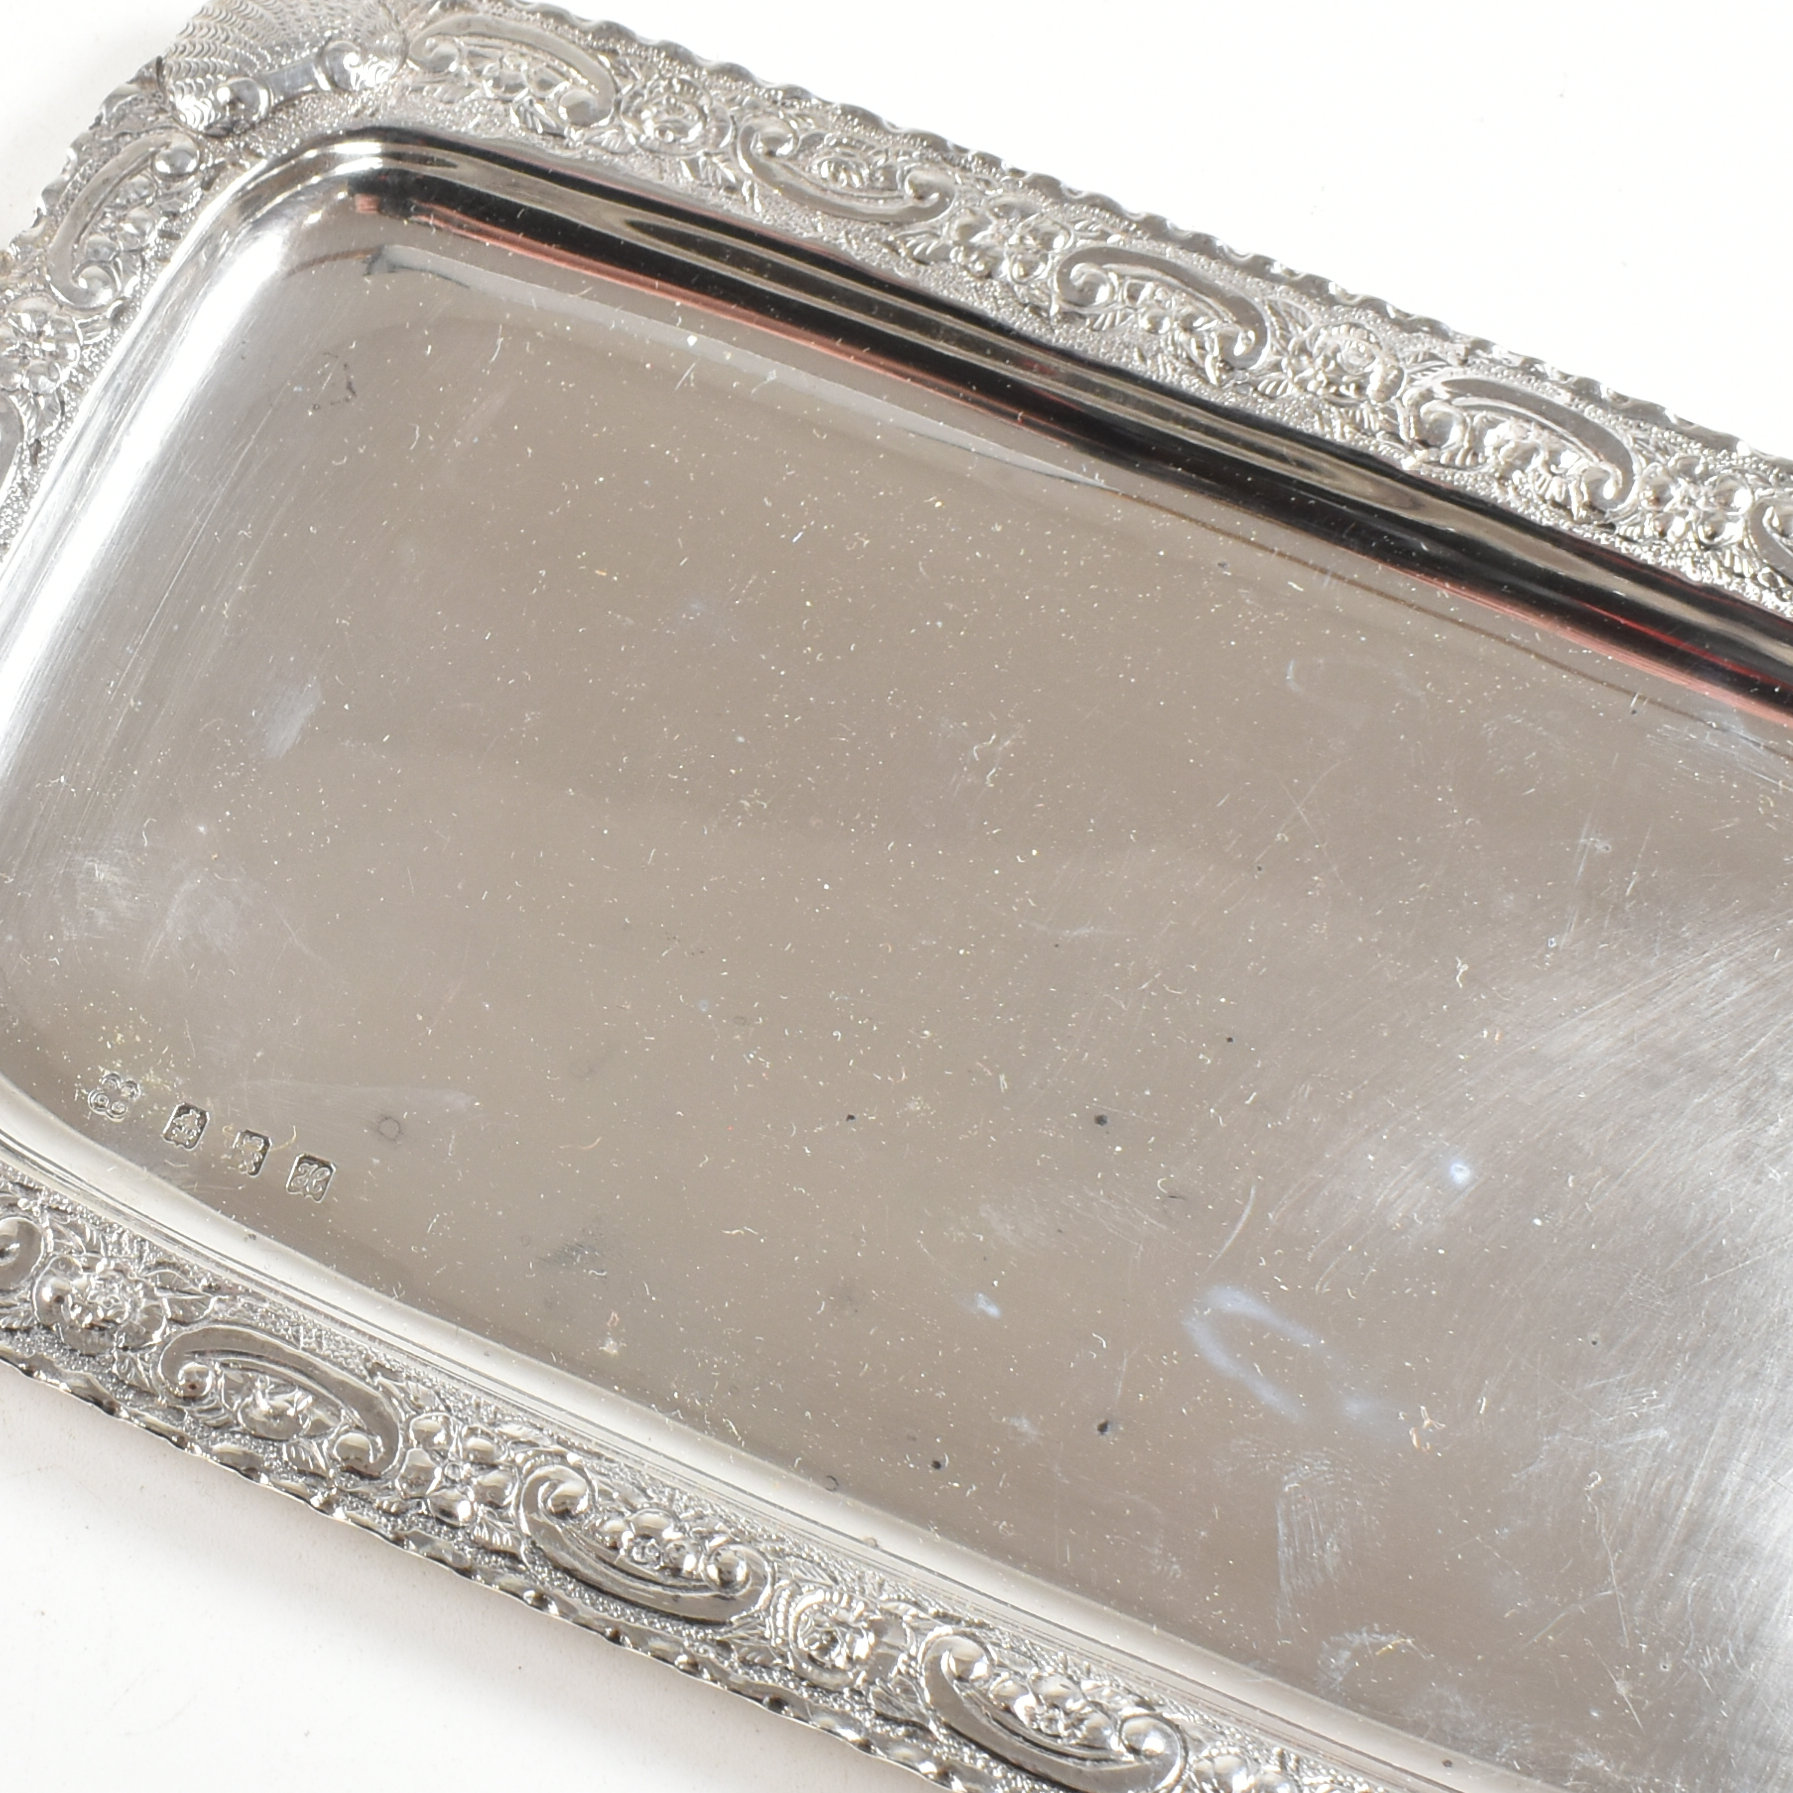 EDWARDIAN CASED SILVER MOUNTED TOT GLASS & TRAY SET - Image 14 of 15